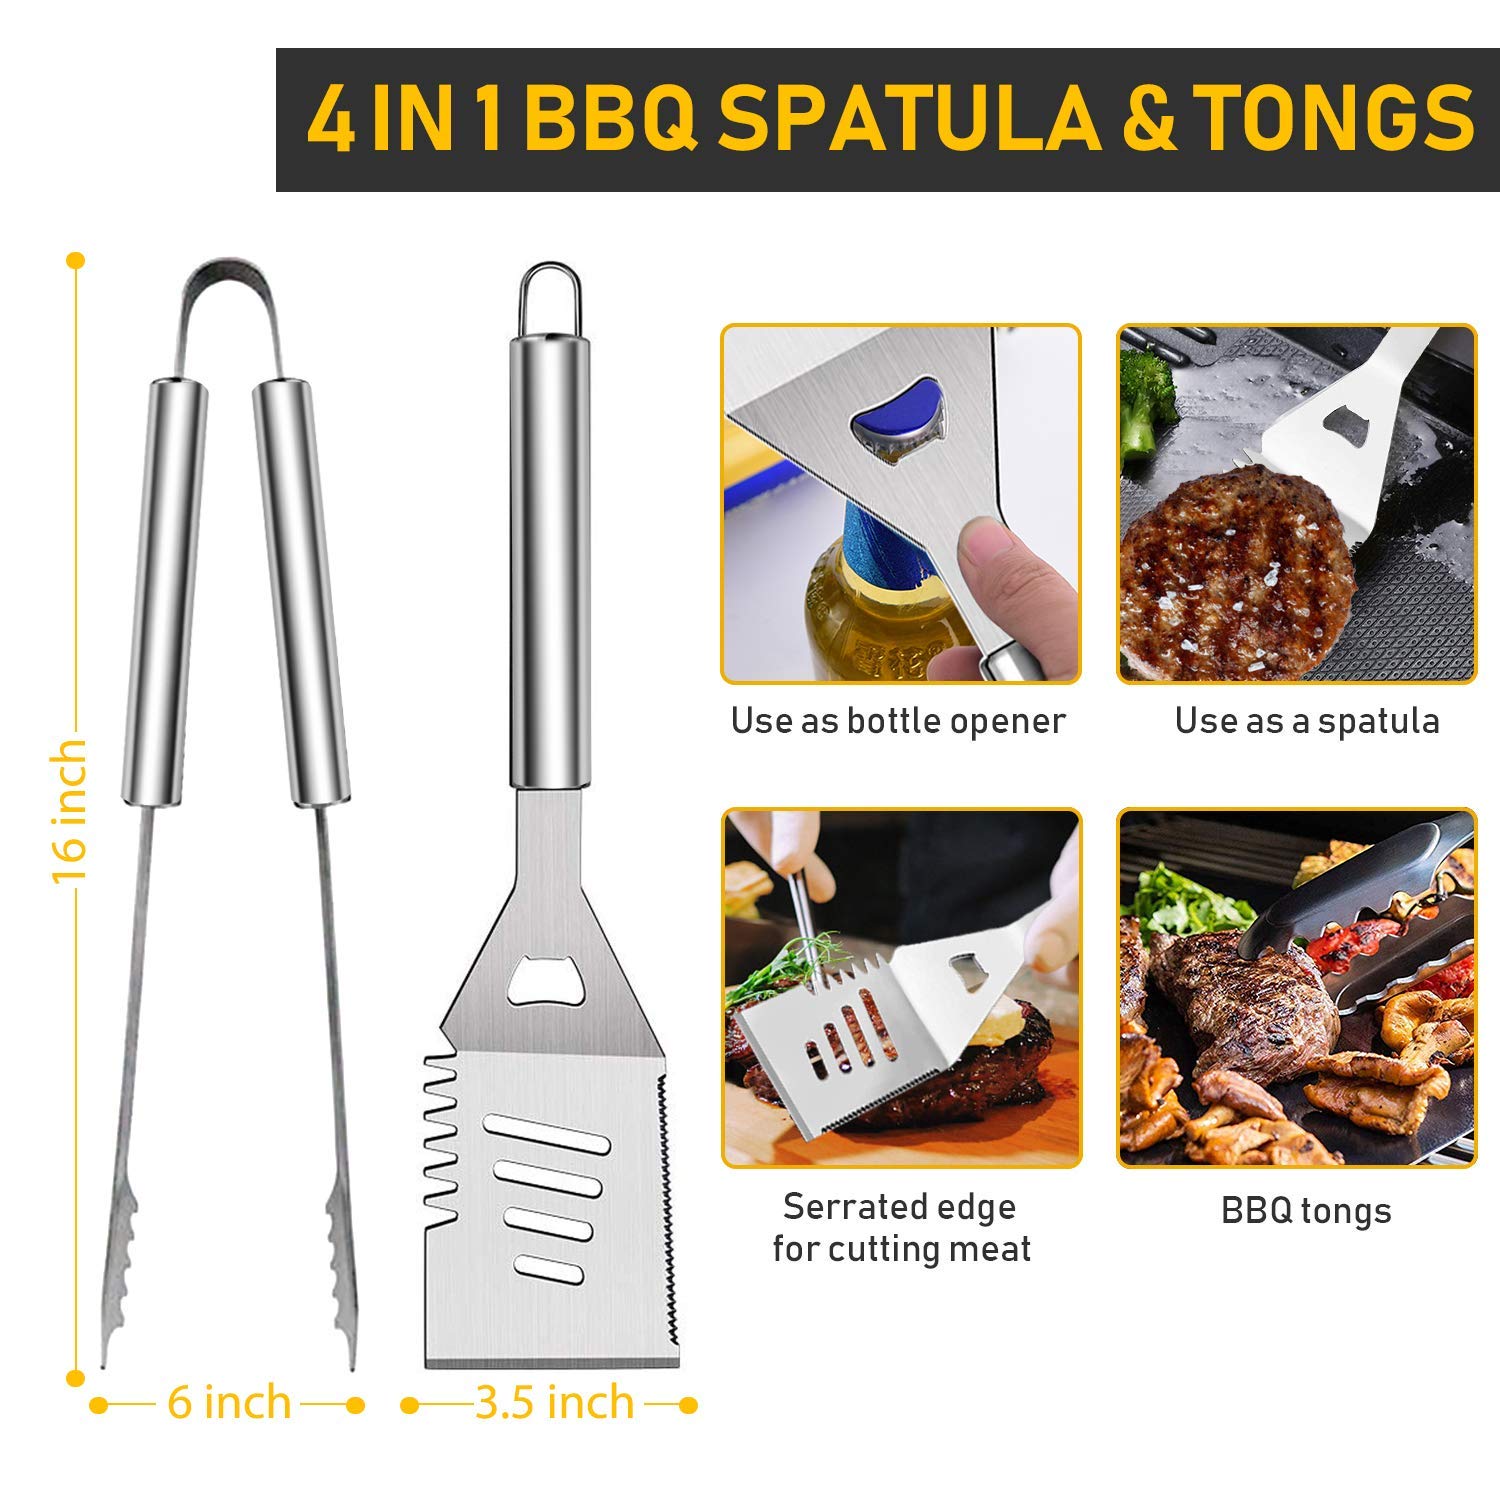 34 Pcs Grill Accessories Grilling Gifts for Men, 16 Inches Heavy Duty BBQ Accessories, Stainless Steel Grill Tools, Grill Mats for Backyard, BBQ Gifts Set - image 3 of 7